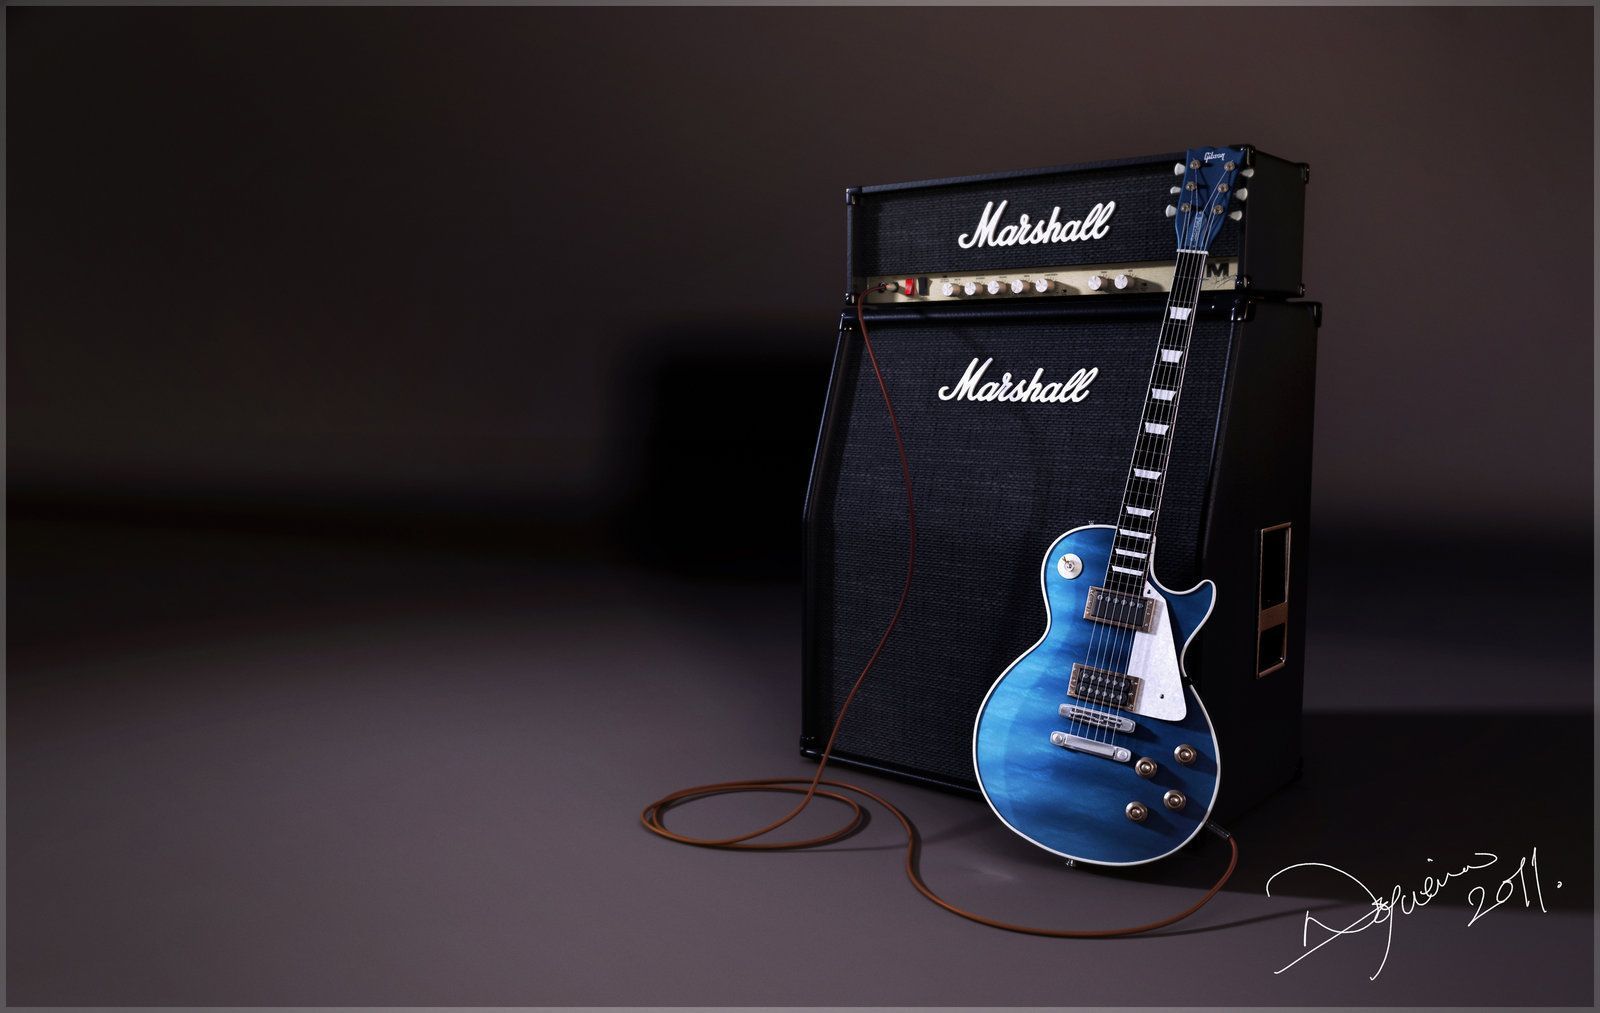 psonst: Gibson Electric Guitar Wallpaper Images